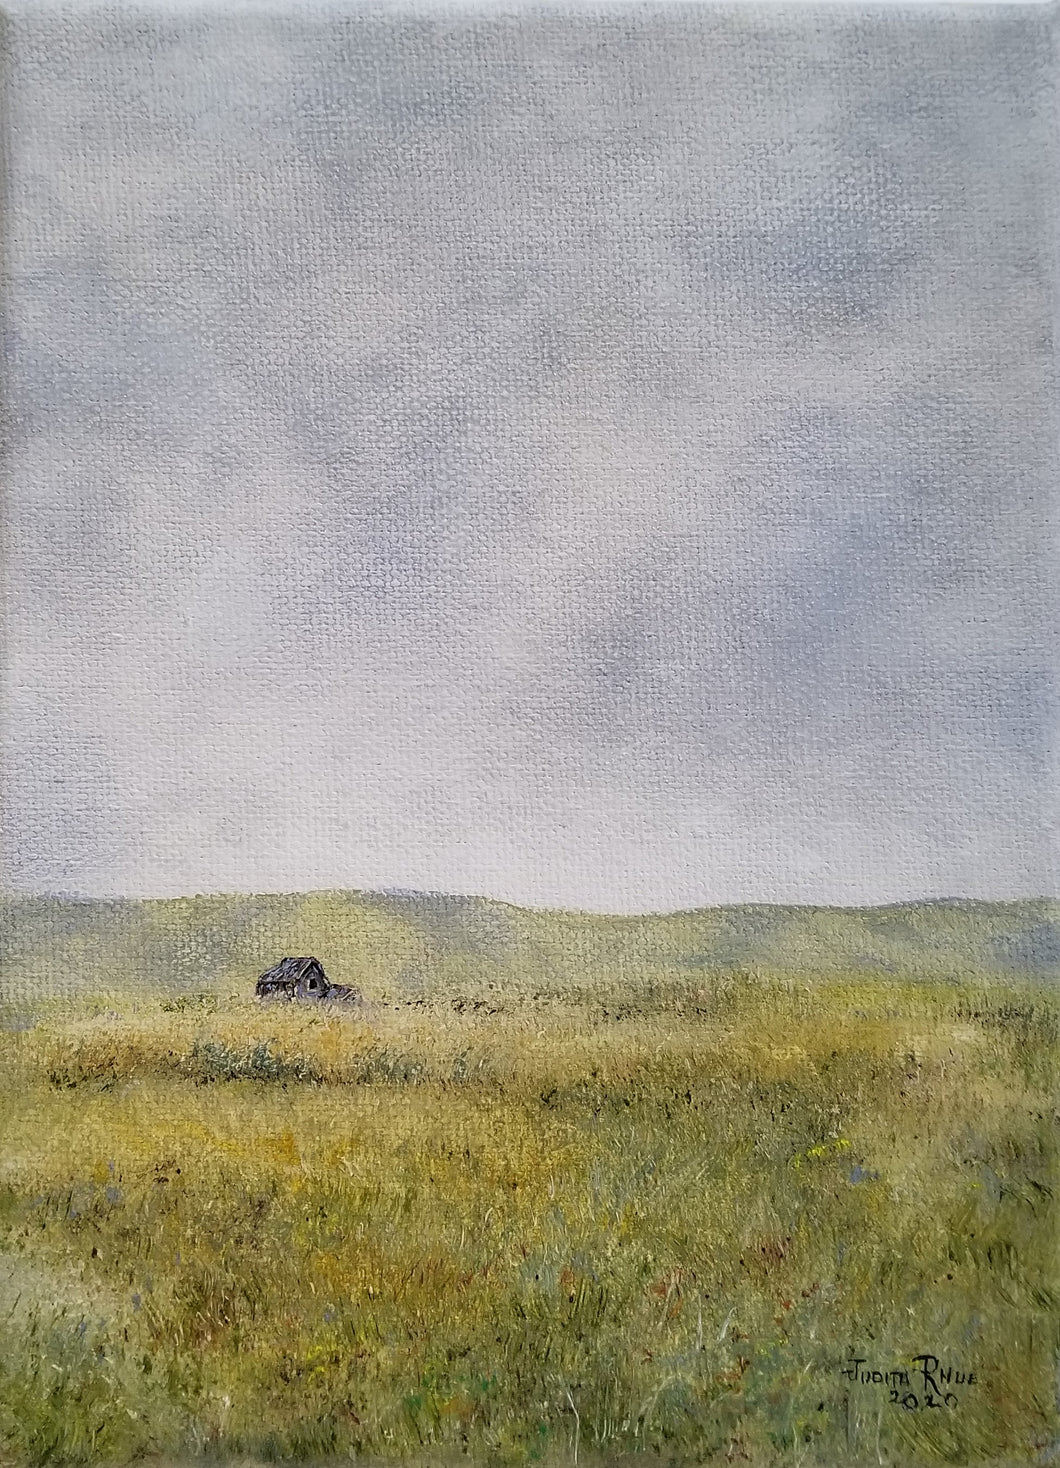 Come What May - original oil painting, landscape, farm, barn, oil painting, country, painting, clouds, rustic, on canvas, small, wall art, decor, gift, art